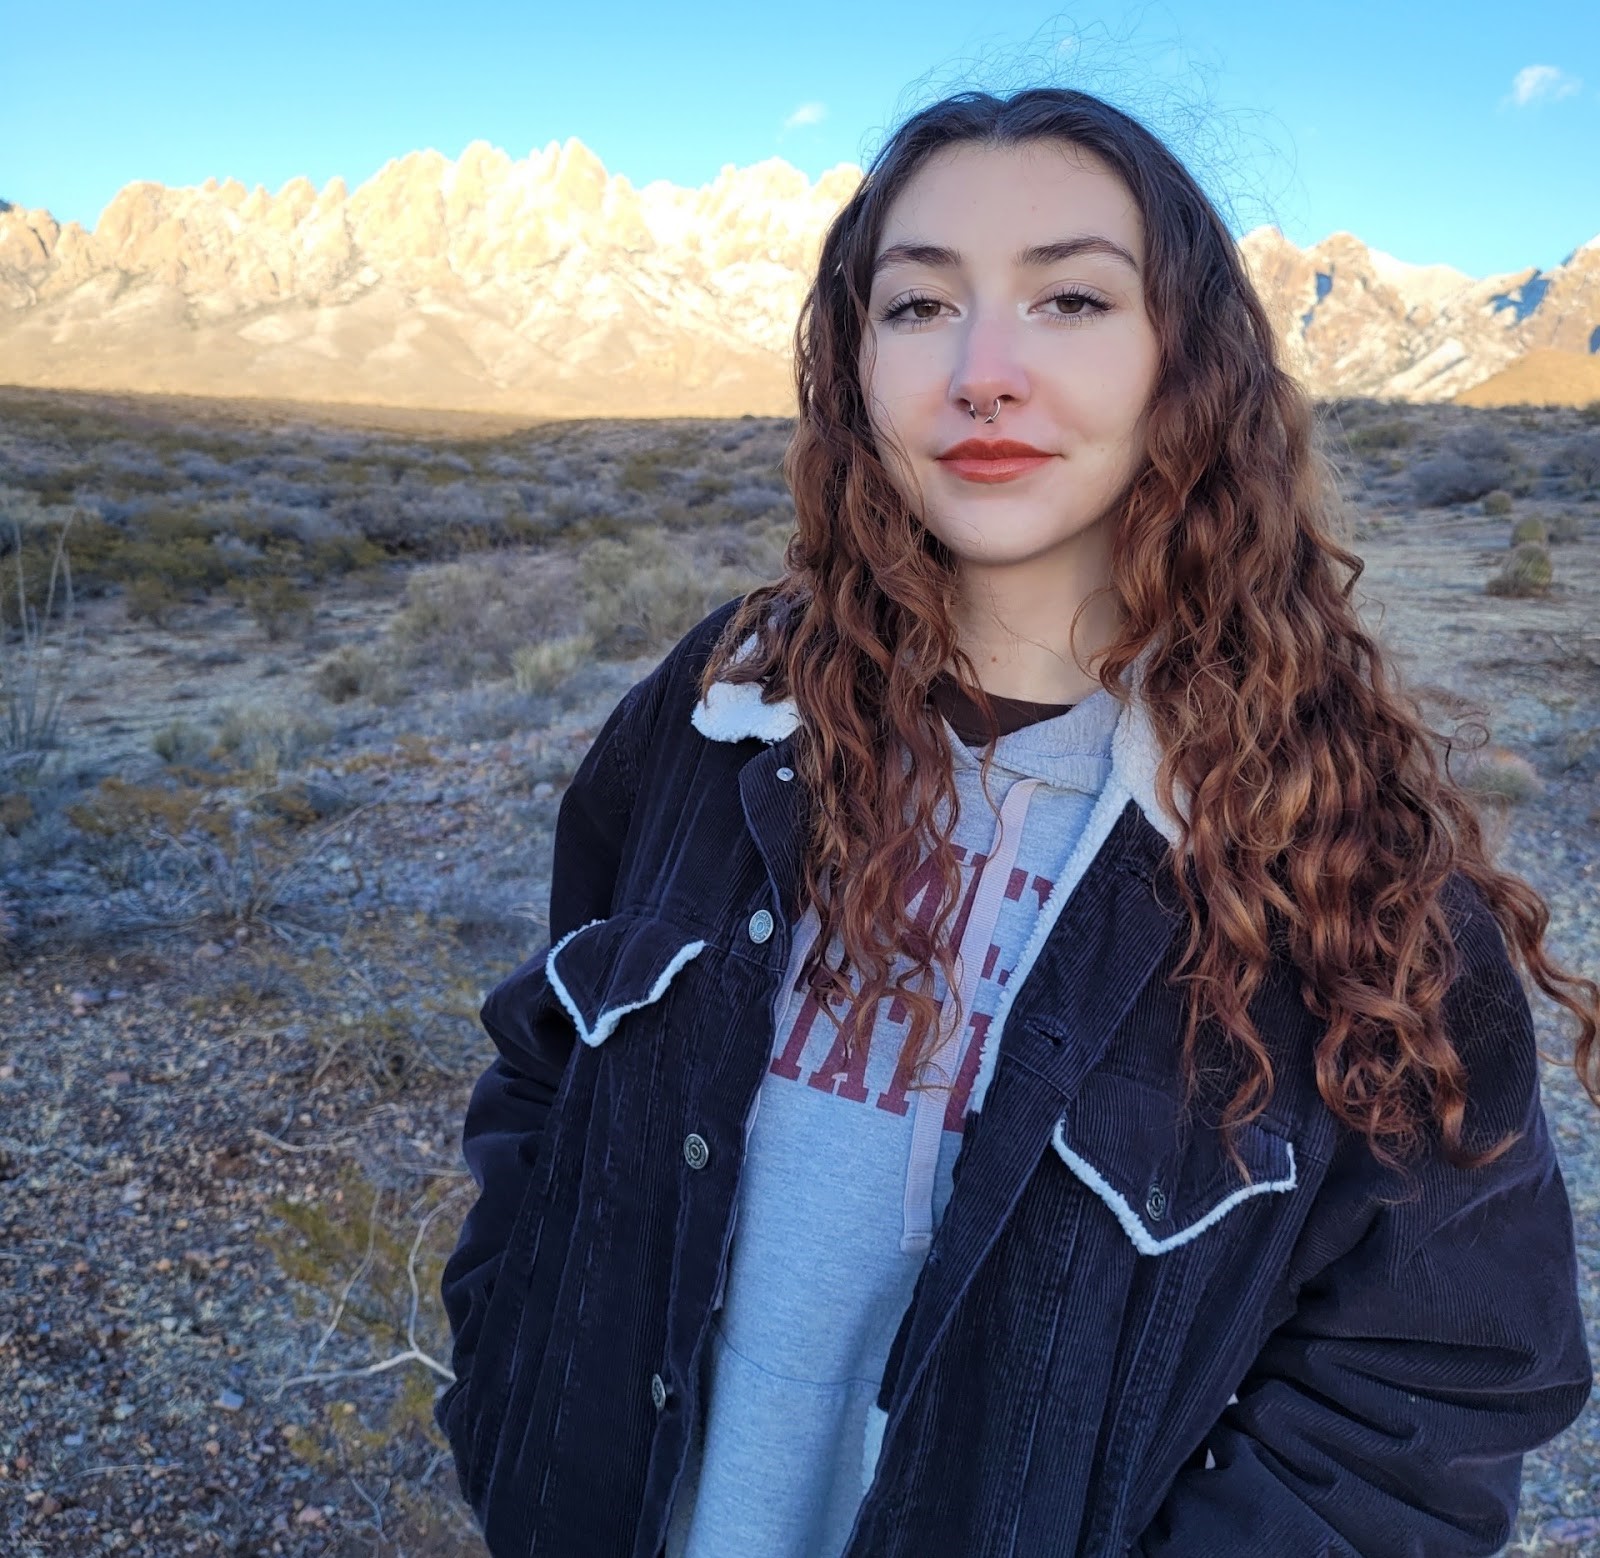 Julianna Diaz standing before the snow-covered Organ Mountains. She has brown curly hair and is wearing a black jacket over a gray New Mexico State sweatshirt.